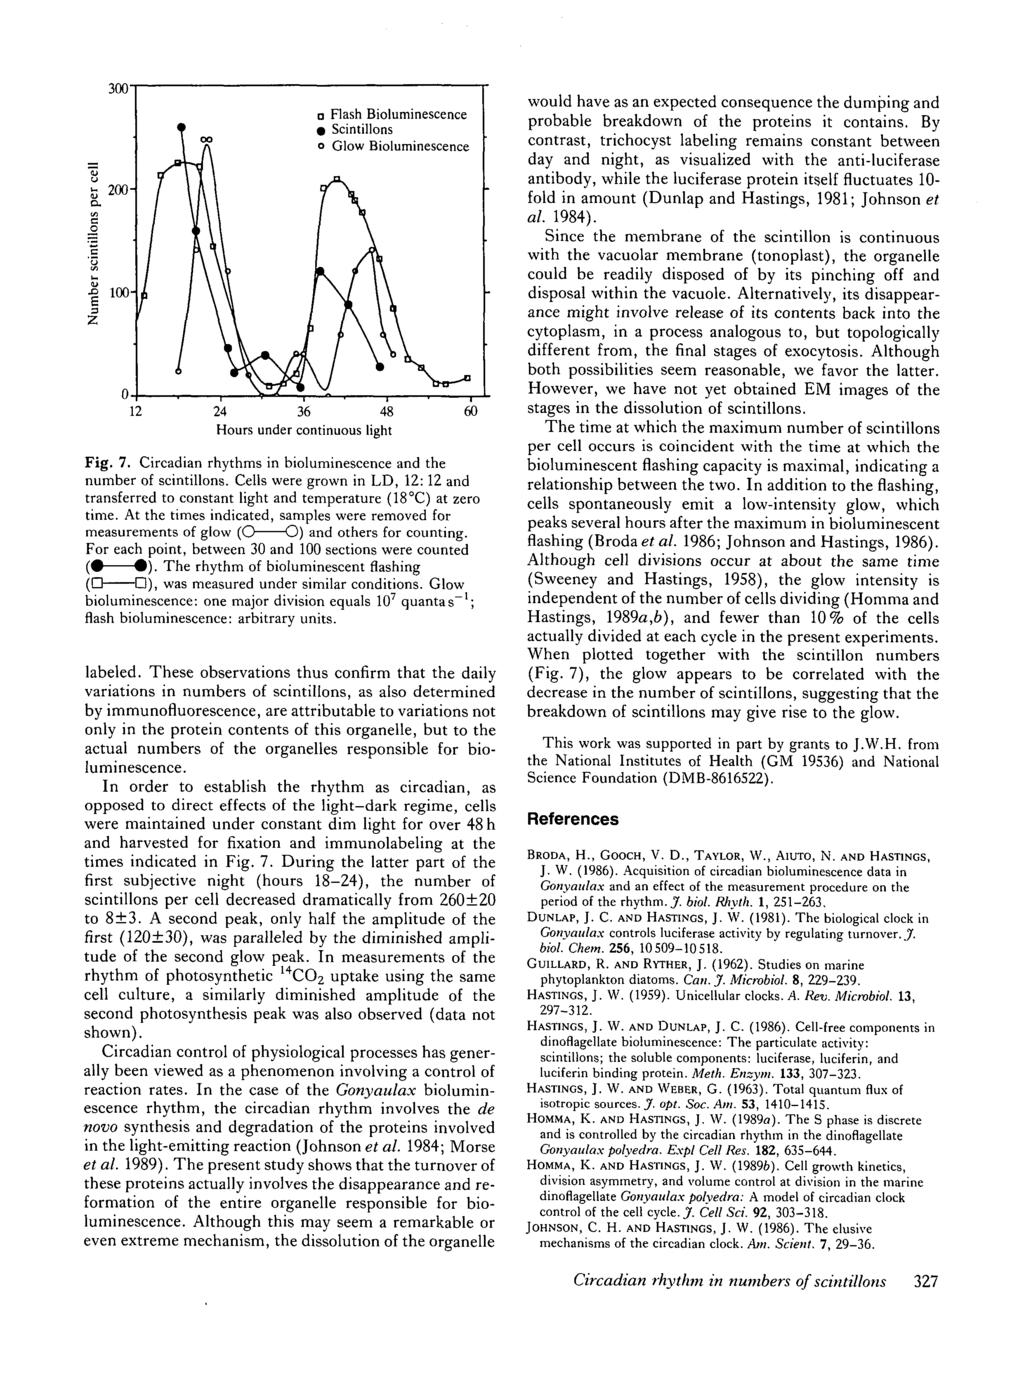 300' a 200-100- a Flash Bioluminescence 9 Scintillons o Glow Bioluminescence 12 24 36 48 Hours under continuous light Fig. 7. Circadian rhythms in bioluminescence and the number of scintillons.